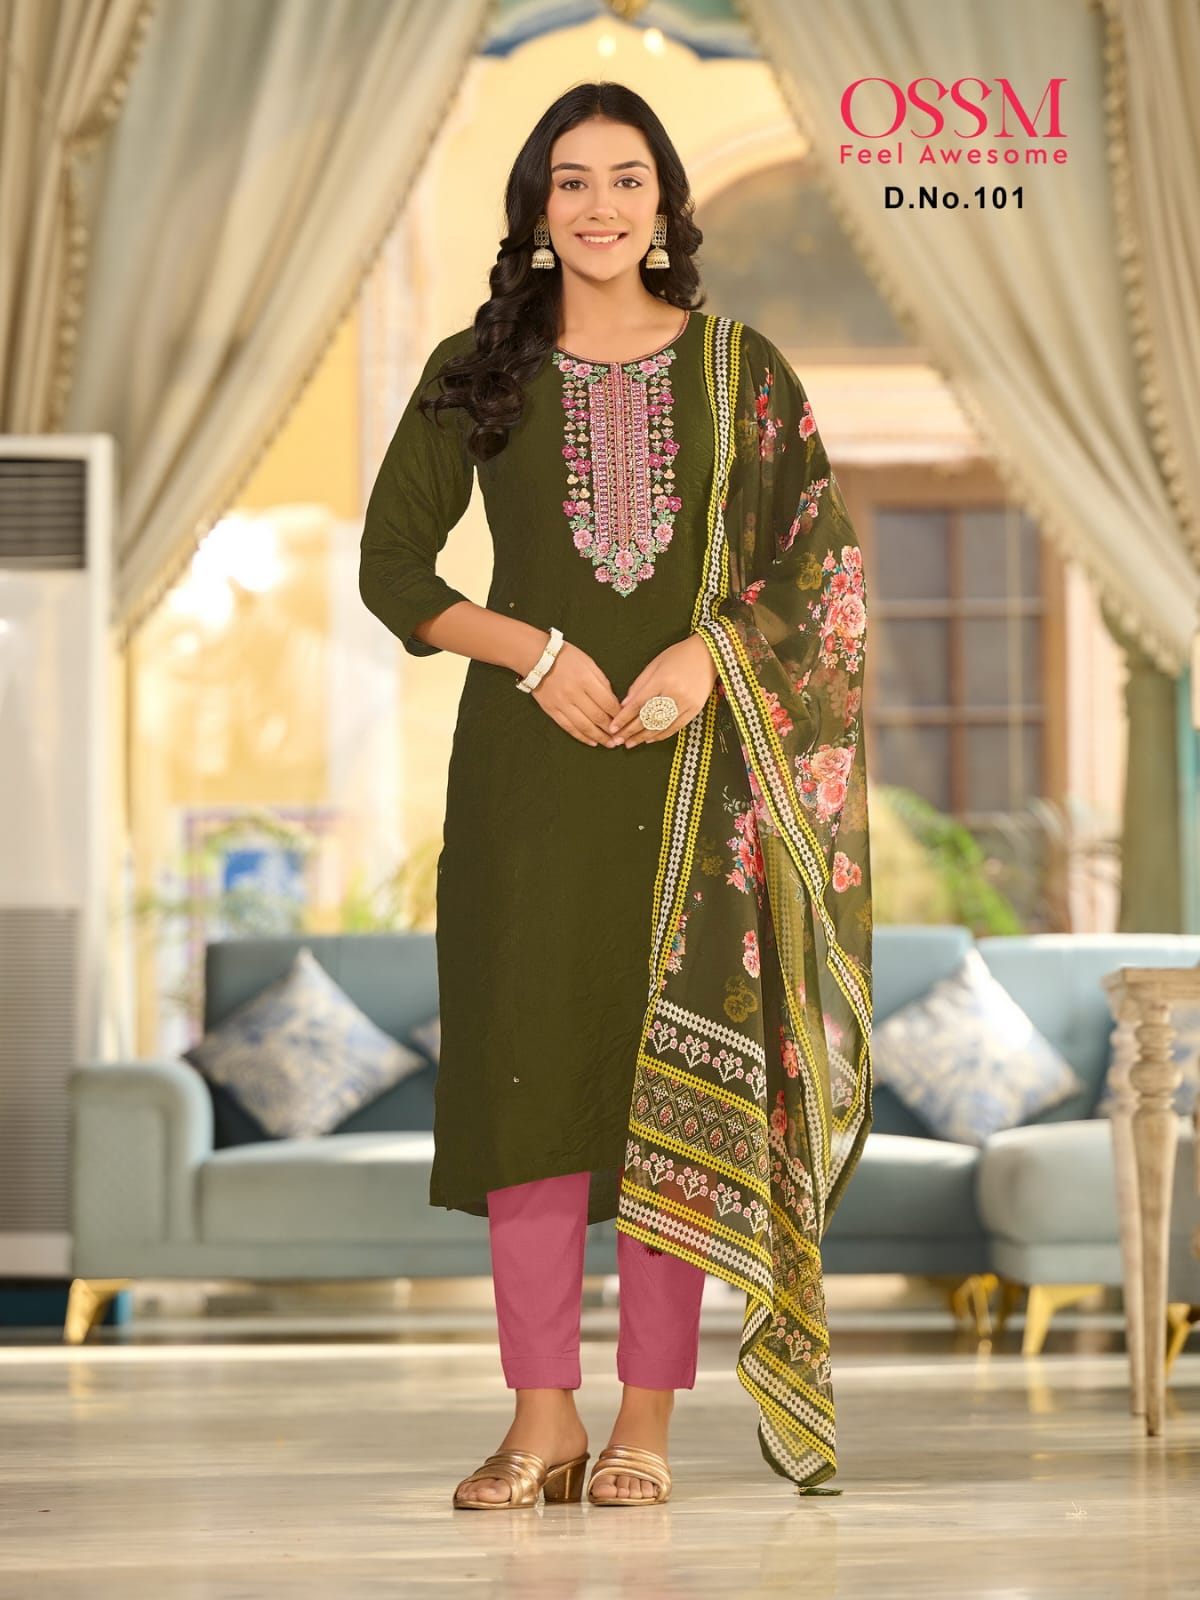 Gulaal Ossm Viscose Readymade Pant Style Suits